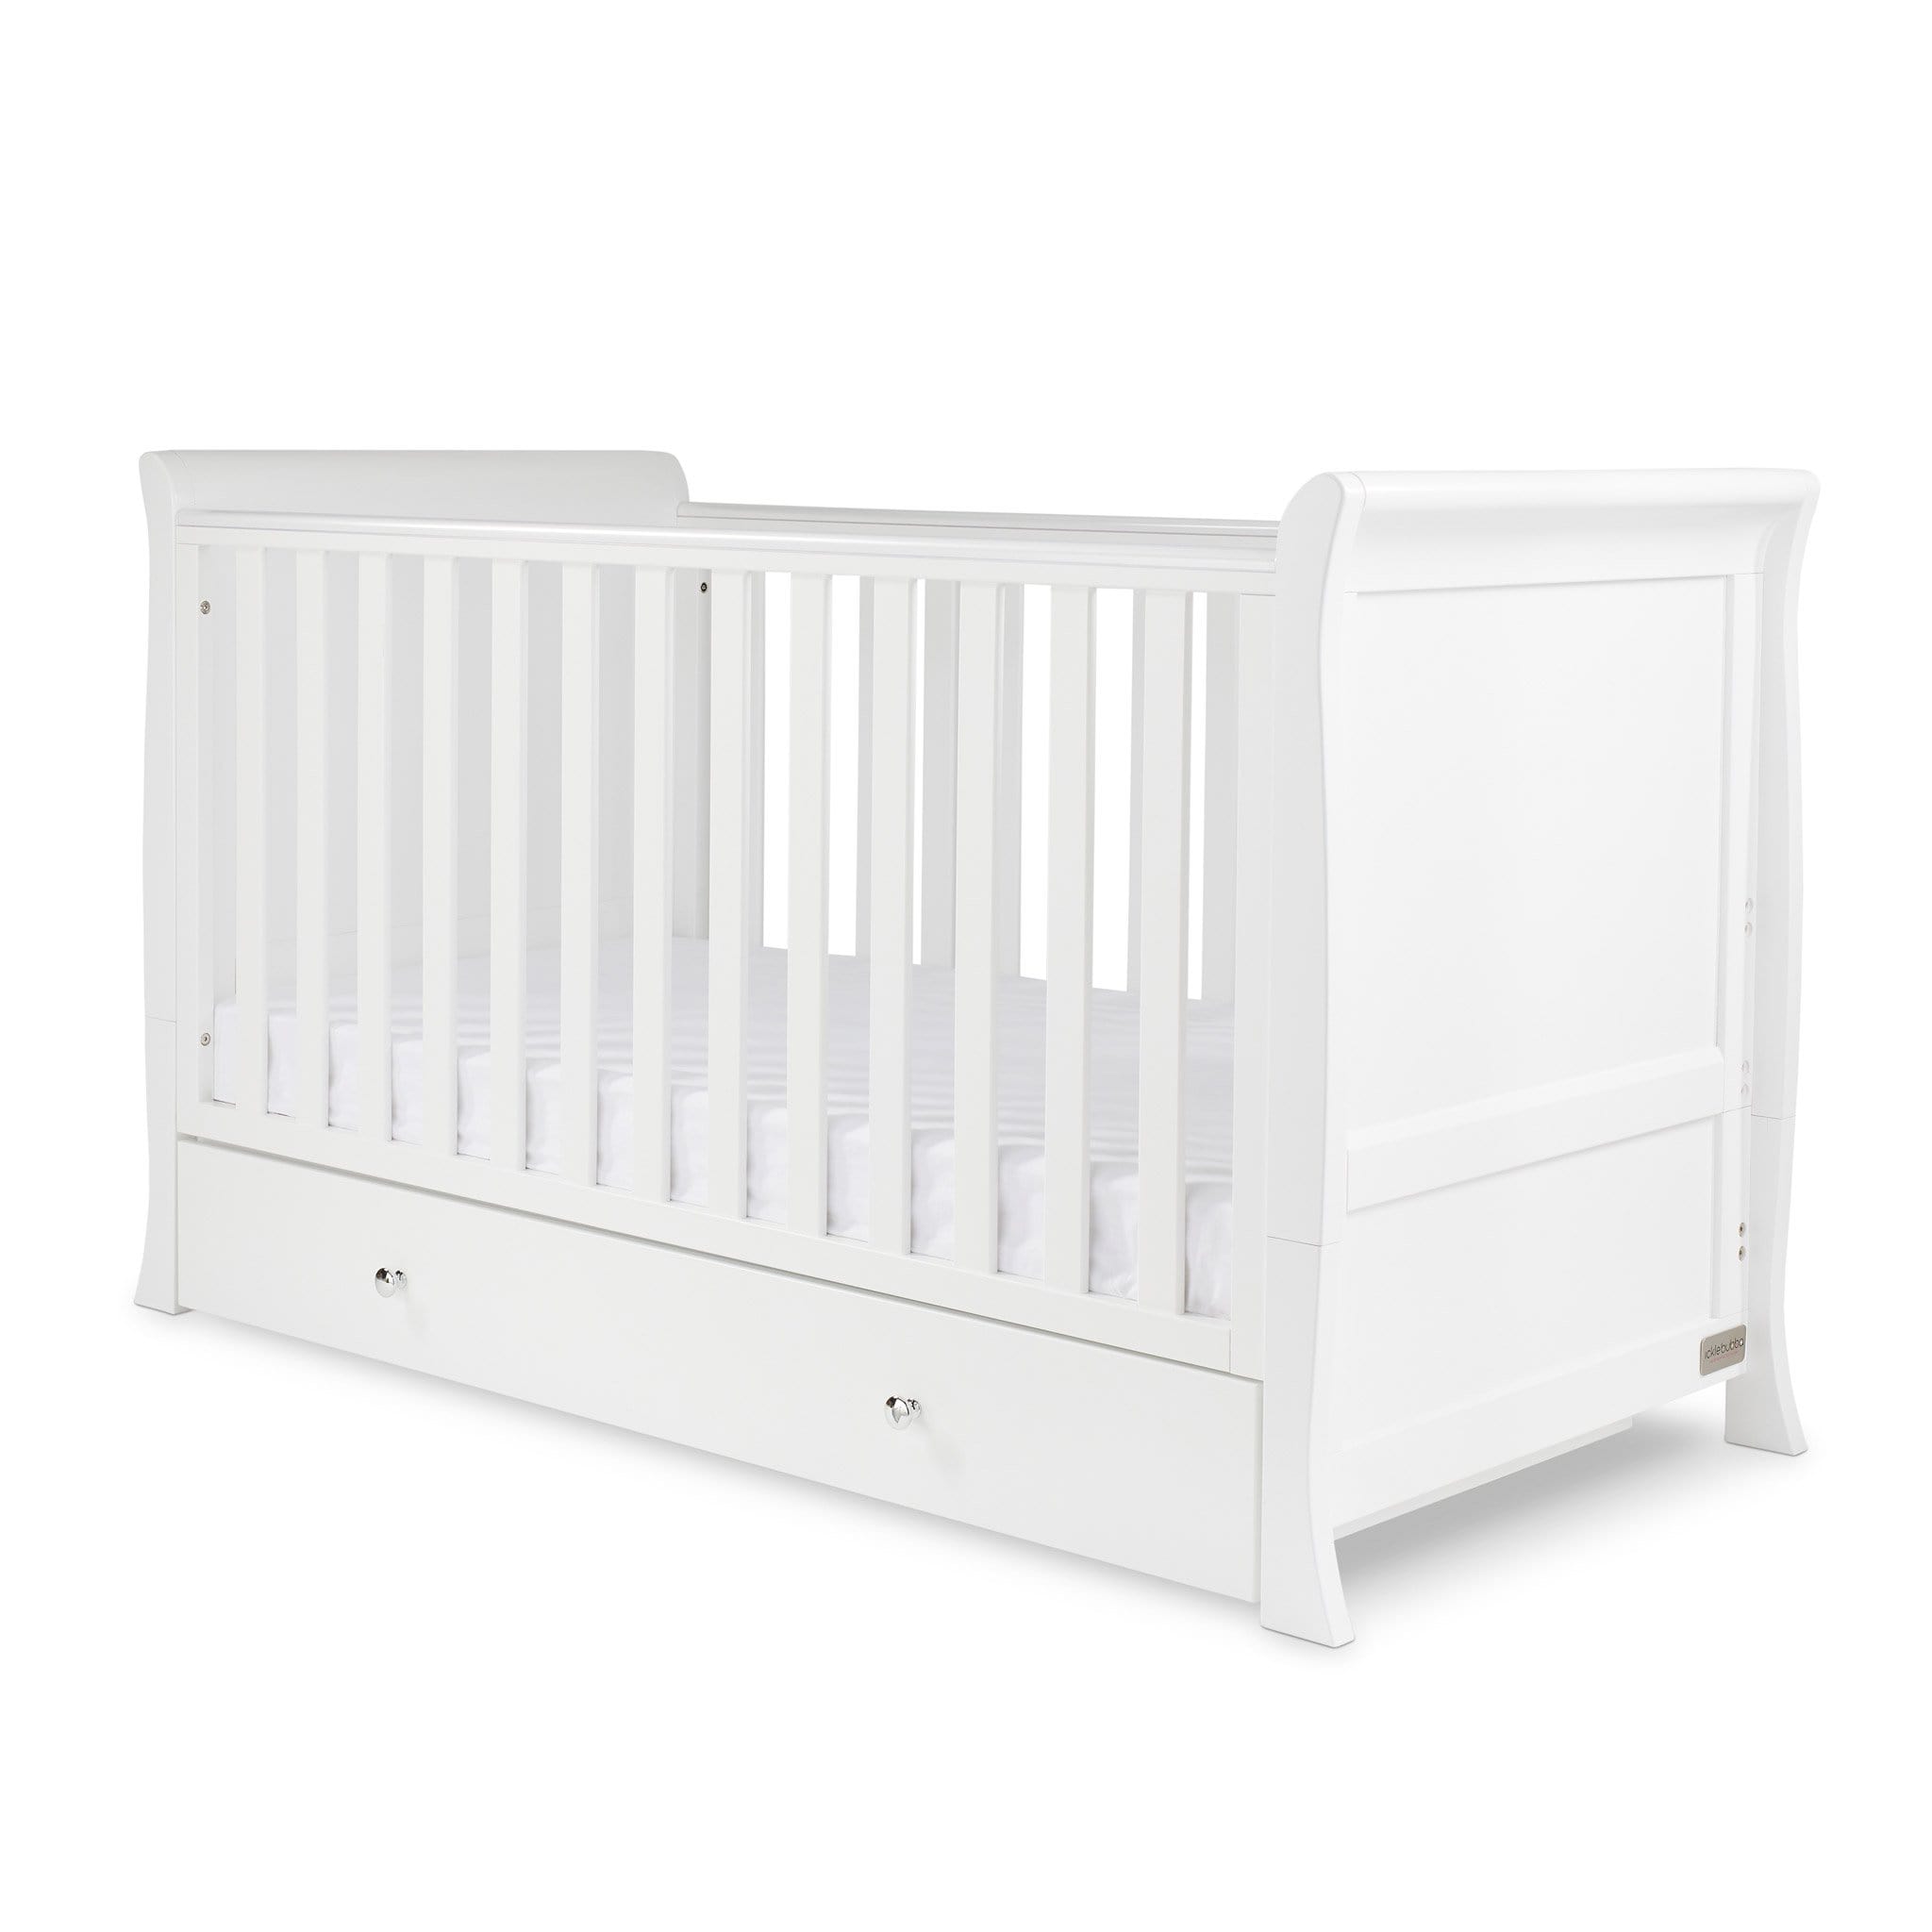 Ickle Bubba Nursery Room Sets Ickle Bubba Snowdon Classic 2 Piece Furniture Set - White